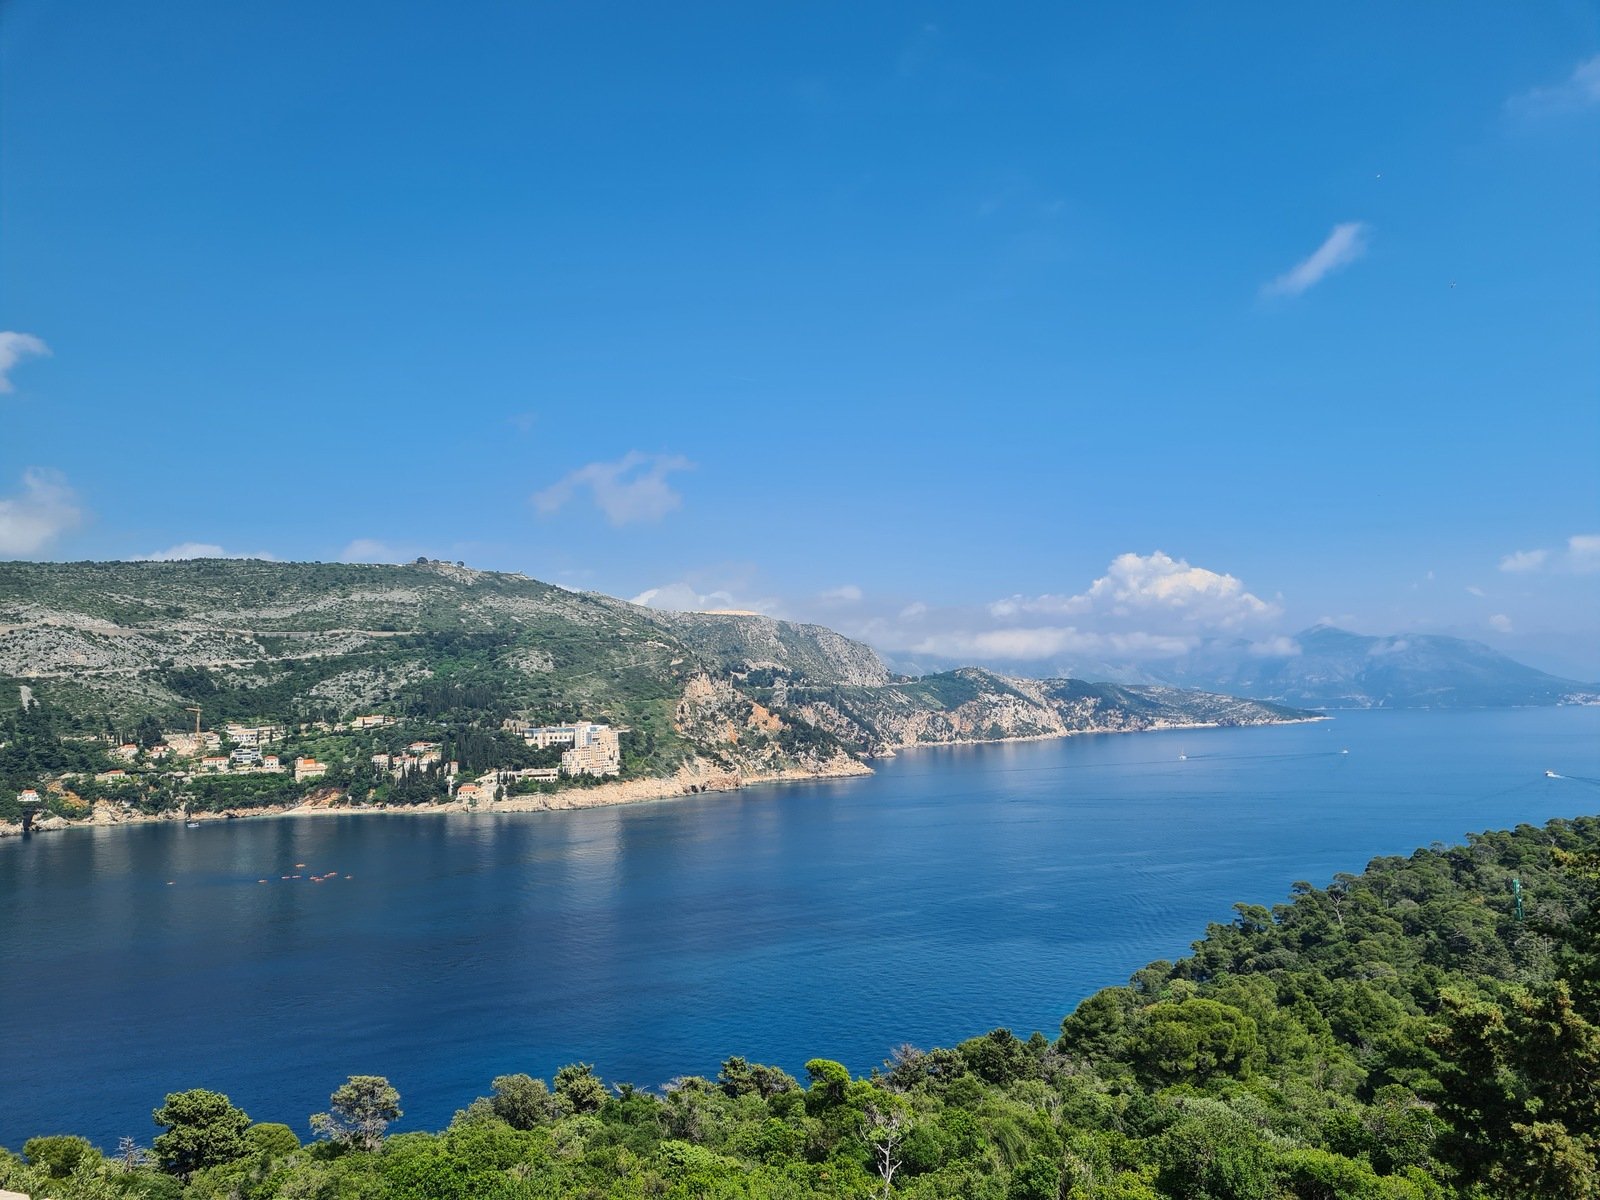 view from the hiking trail at the top of Lokrum island, Dubrovnik